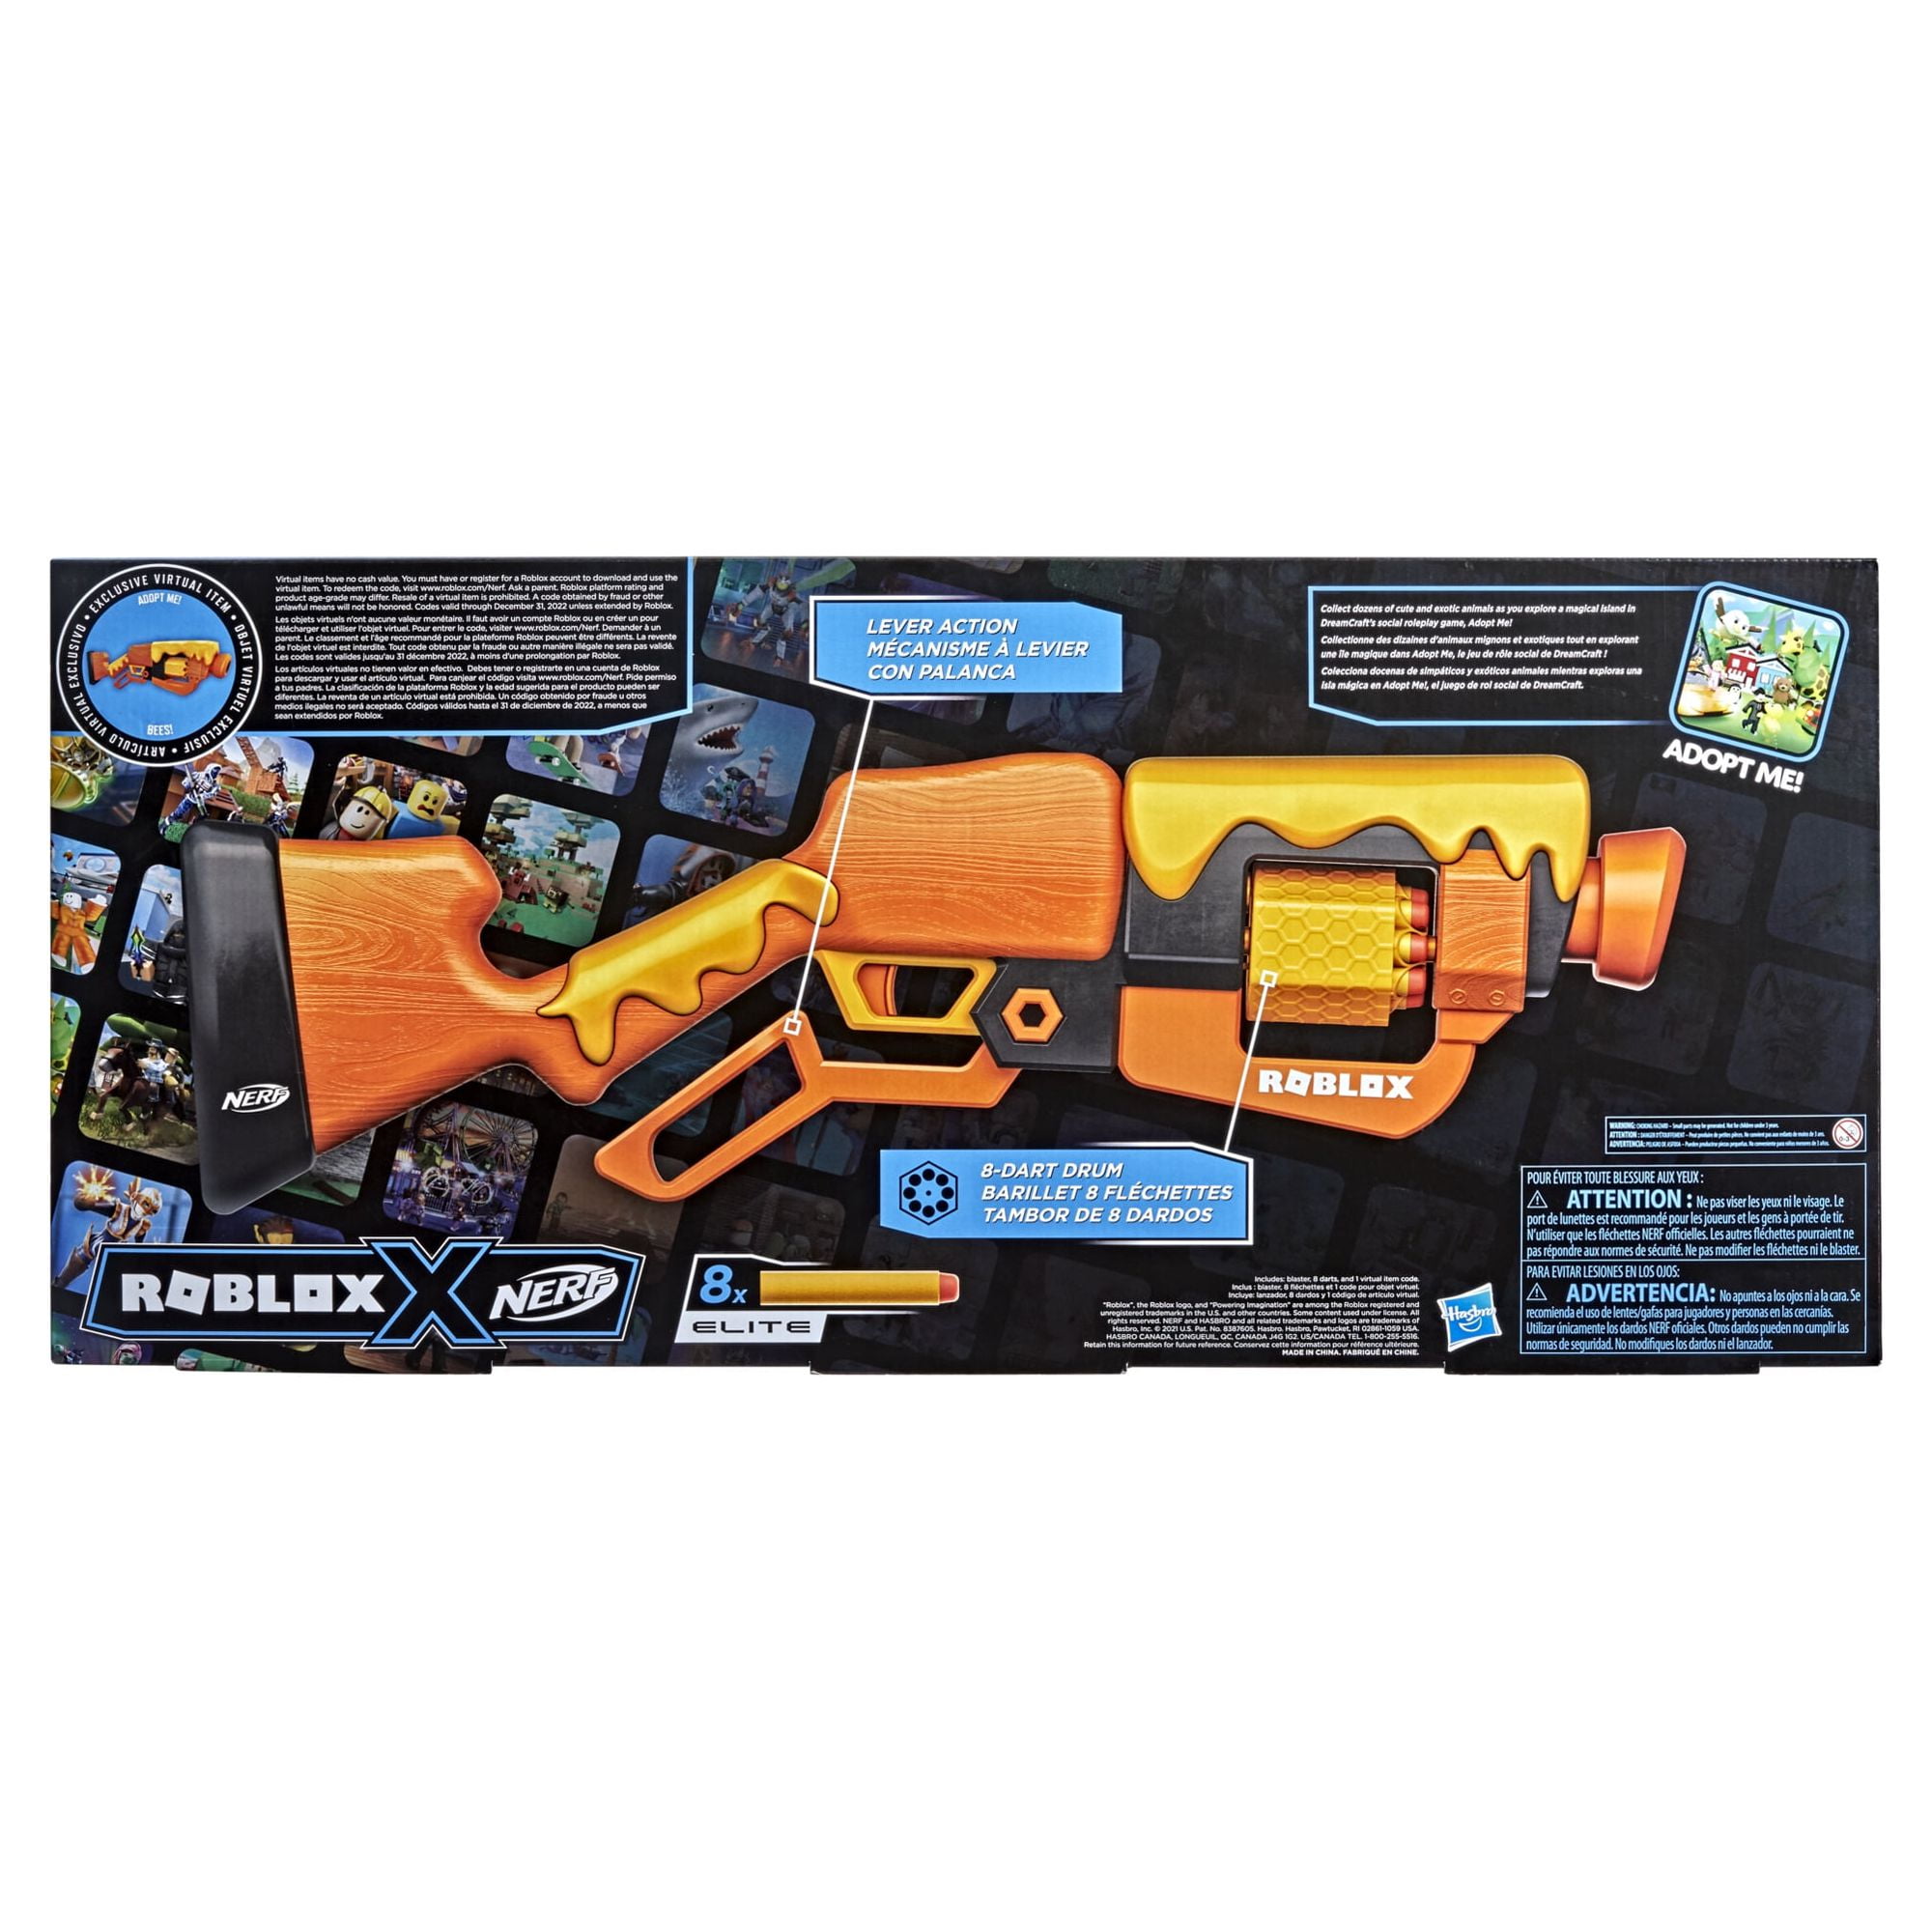 Nerf Roblox Adopt Me! Bees! Lever Action Dart Blaster Gun Includes Code New